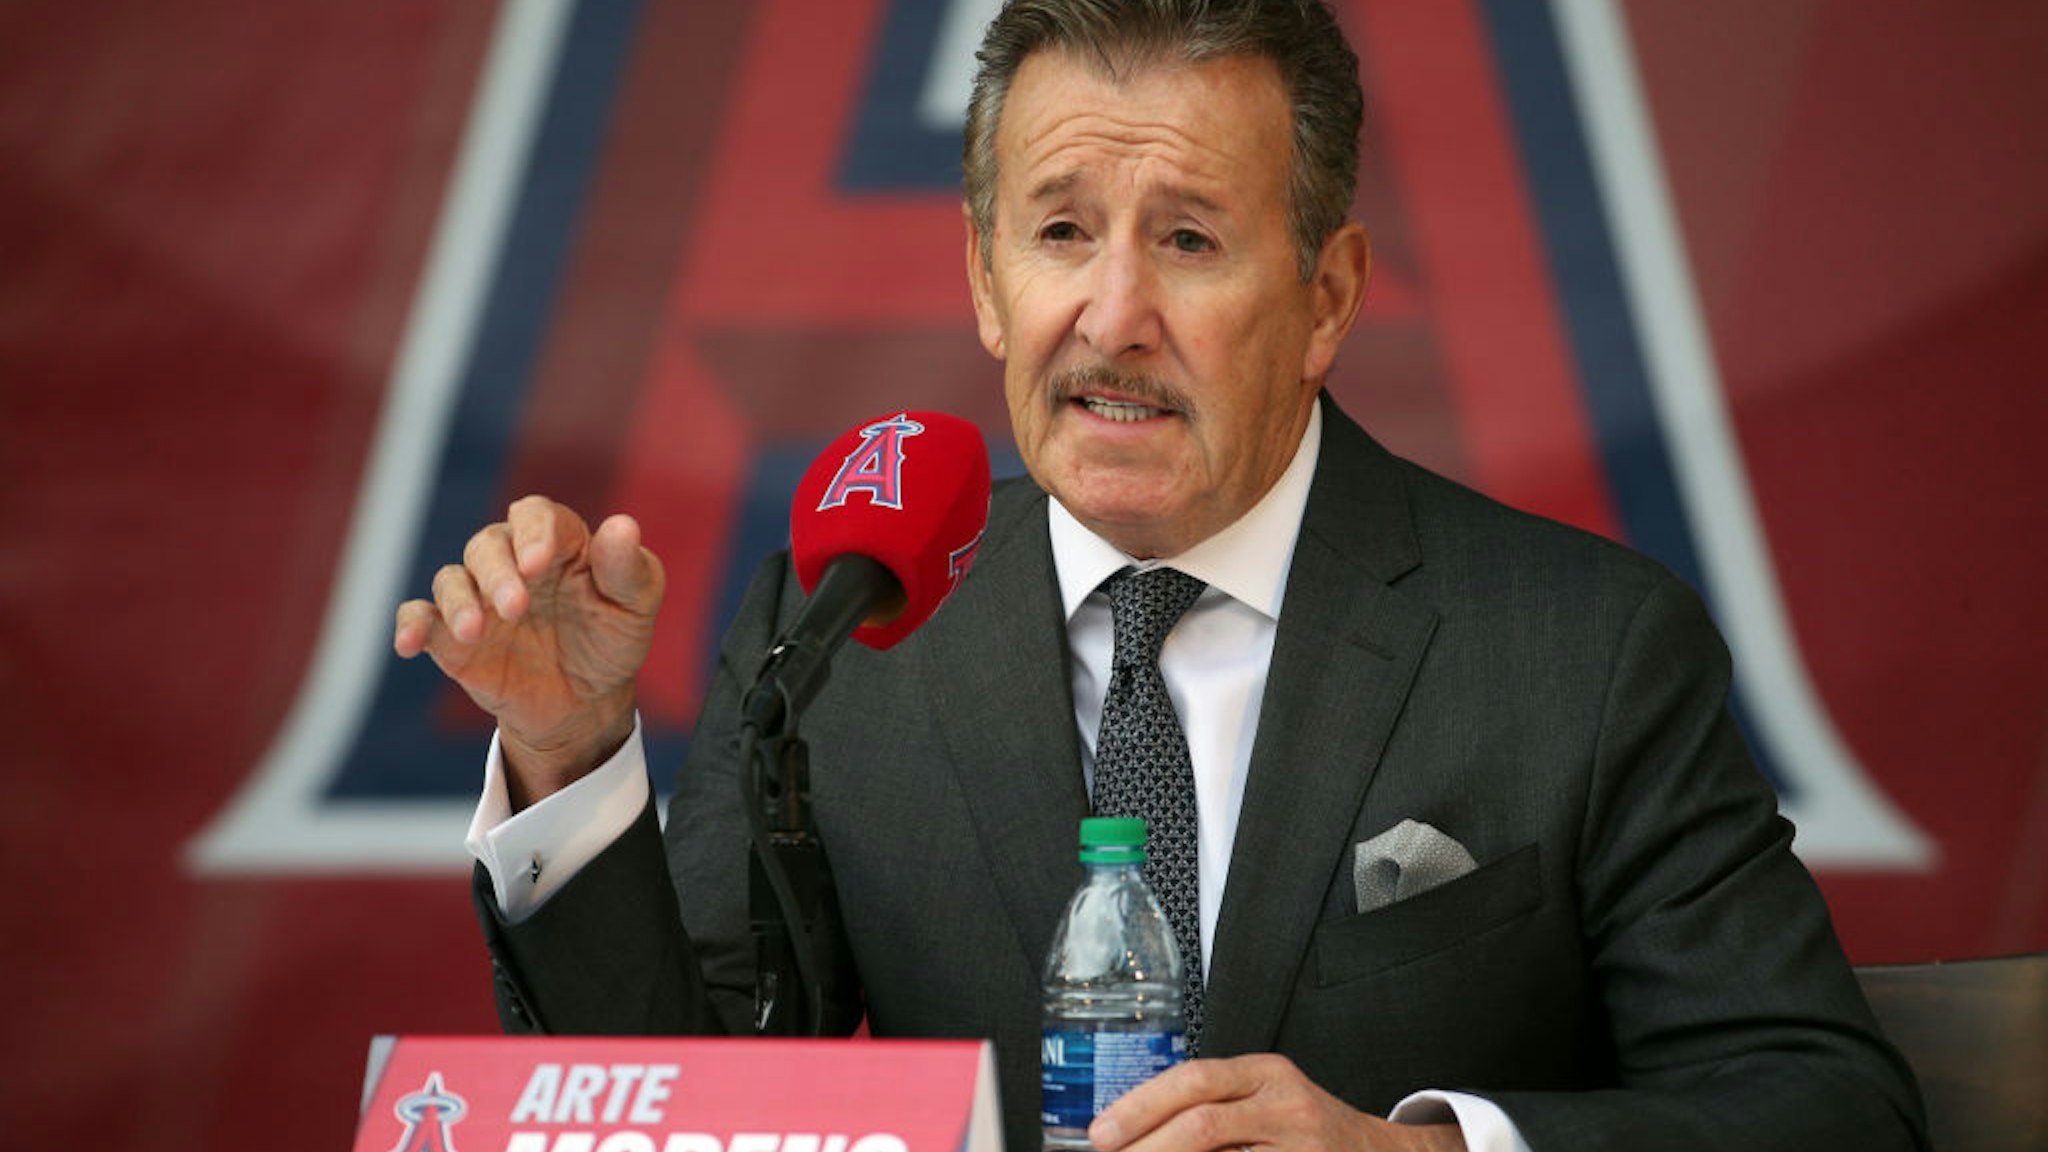 Los Angeles Angels owner Arte Moreno answers questions during a press conference to introduce Anthony Rendon at Angel Stadium of Anaheim on December 14, 2019 in Anaheim, CA.